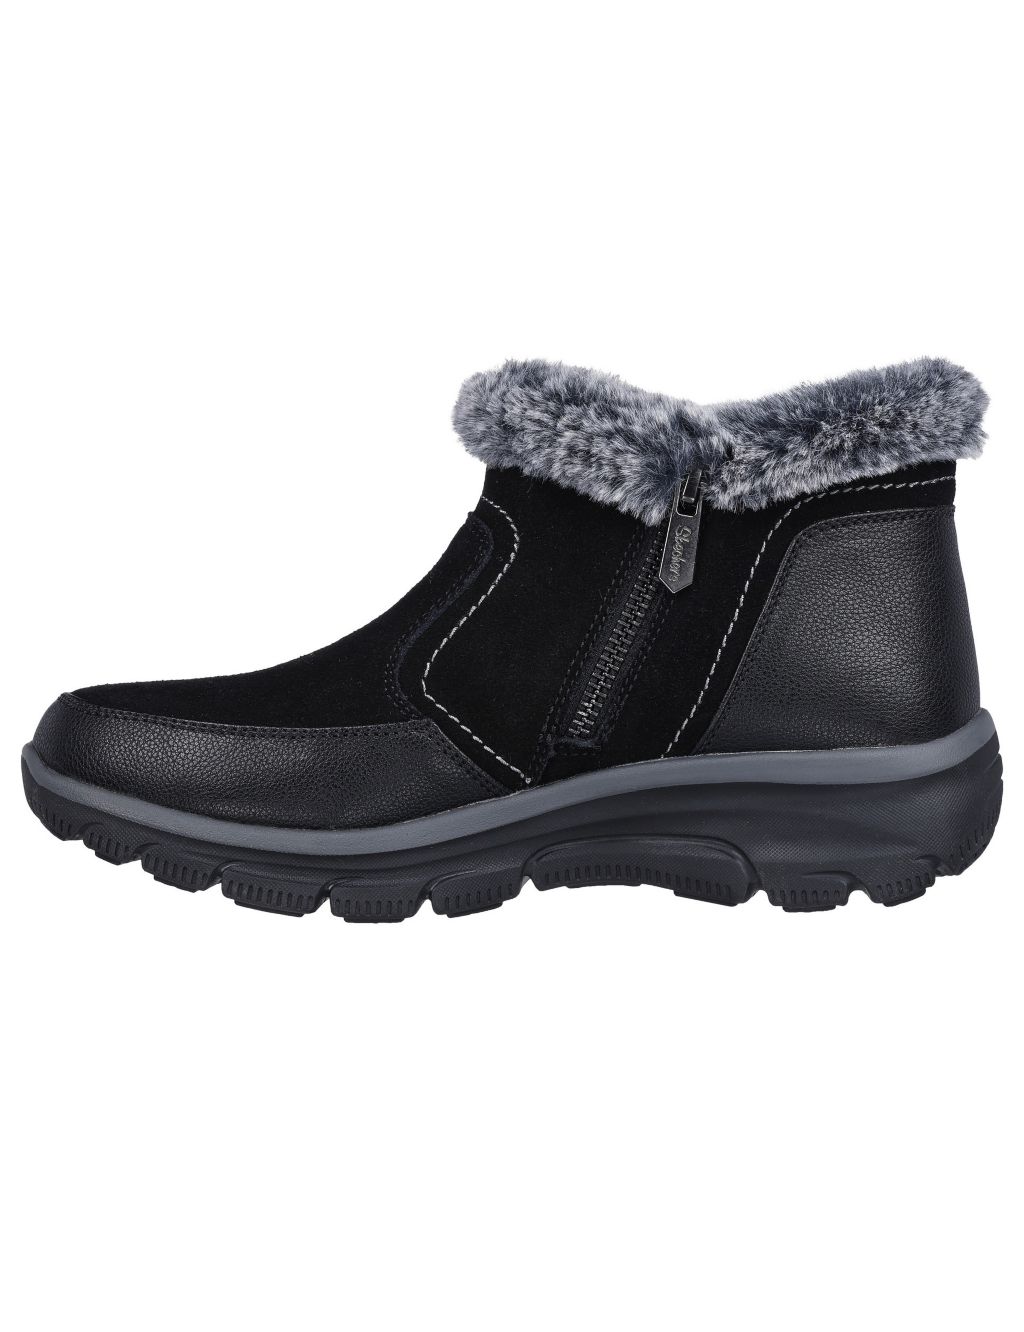 Easy Going Warm Escape Leather Flat Boots image 5